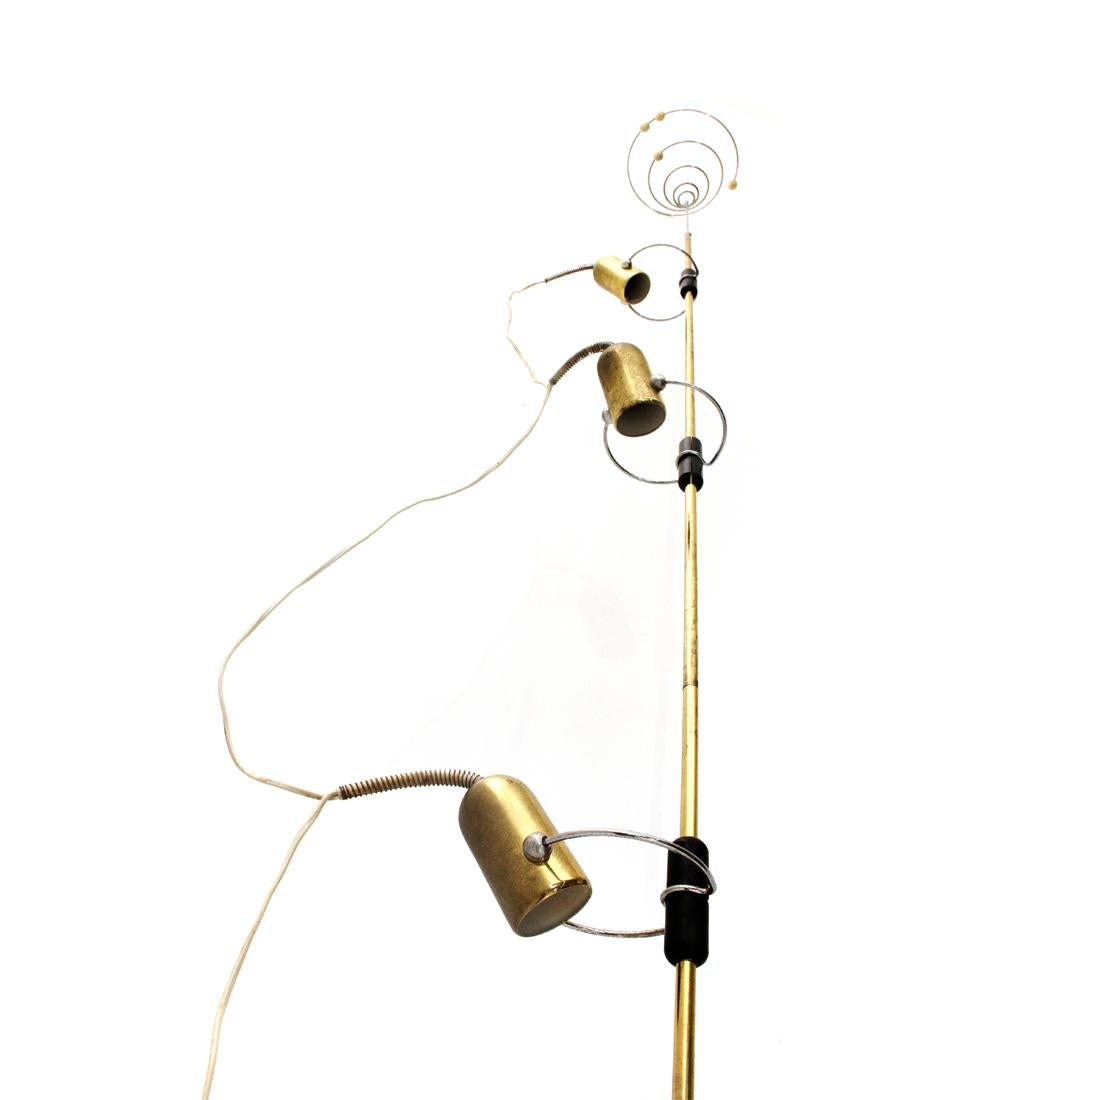 Floor lamp produced by Reggiani based on a design by Francesco Fois in the 1960s.
Sky ground locking system.
Brass-plated metal stem.
Springs in chromed metal.
Three adjustable diffusers in plastic, chromed metal and brass-plated metal.
Good